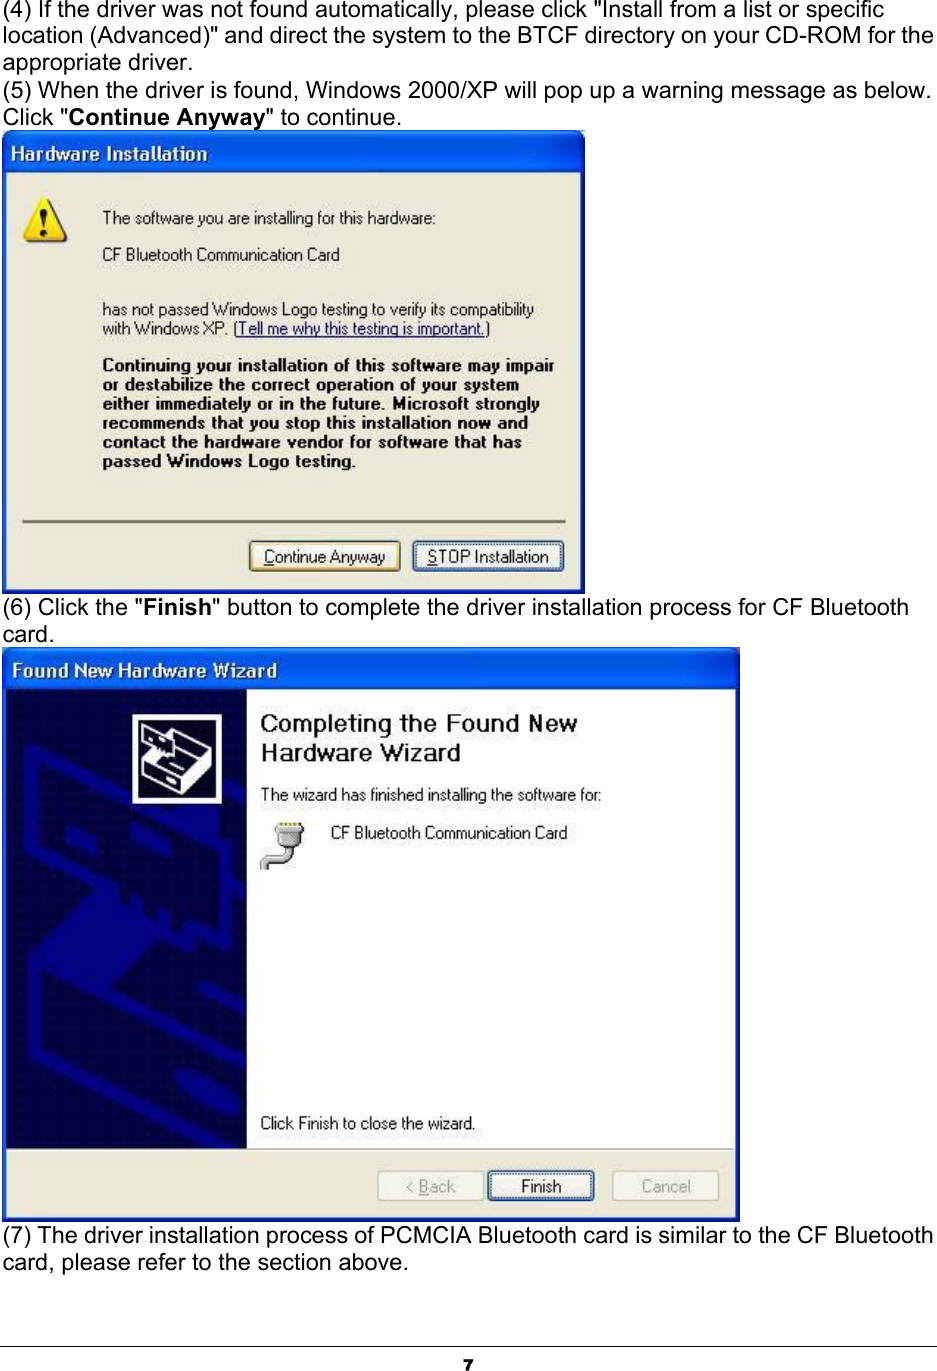   7(4) If the driver was not found automatically, please click &quot;Install from a list or specific location (Advanced)&quot; and direct the system to the BTCF directory on your CD-ROM for the appropriate driver. (5) When the driver is found, Windows 2000/XP will pop up a warning message as below. Click &quot;Continue Anyway&quot; to continue.  (6) Click the &quot;Finish&quot; button to complete the driver installation process for CF Bluetooth card.  (7) The driver installation process of PCMCIA Bluetooth card is similar to the CF Bluetooth card, please refer to the section above. 